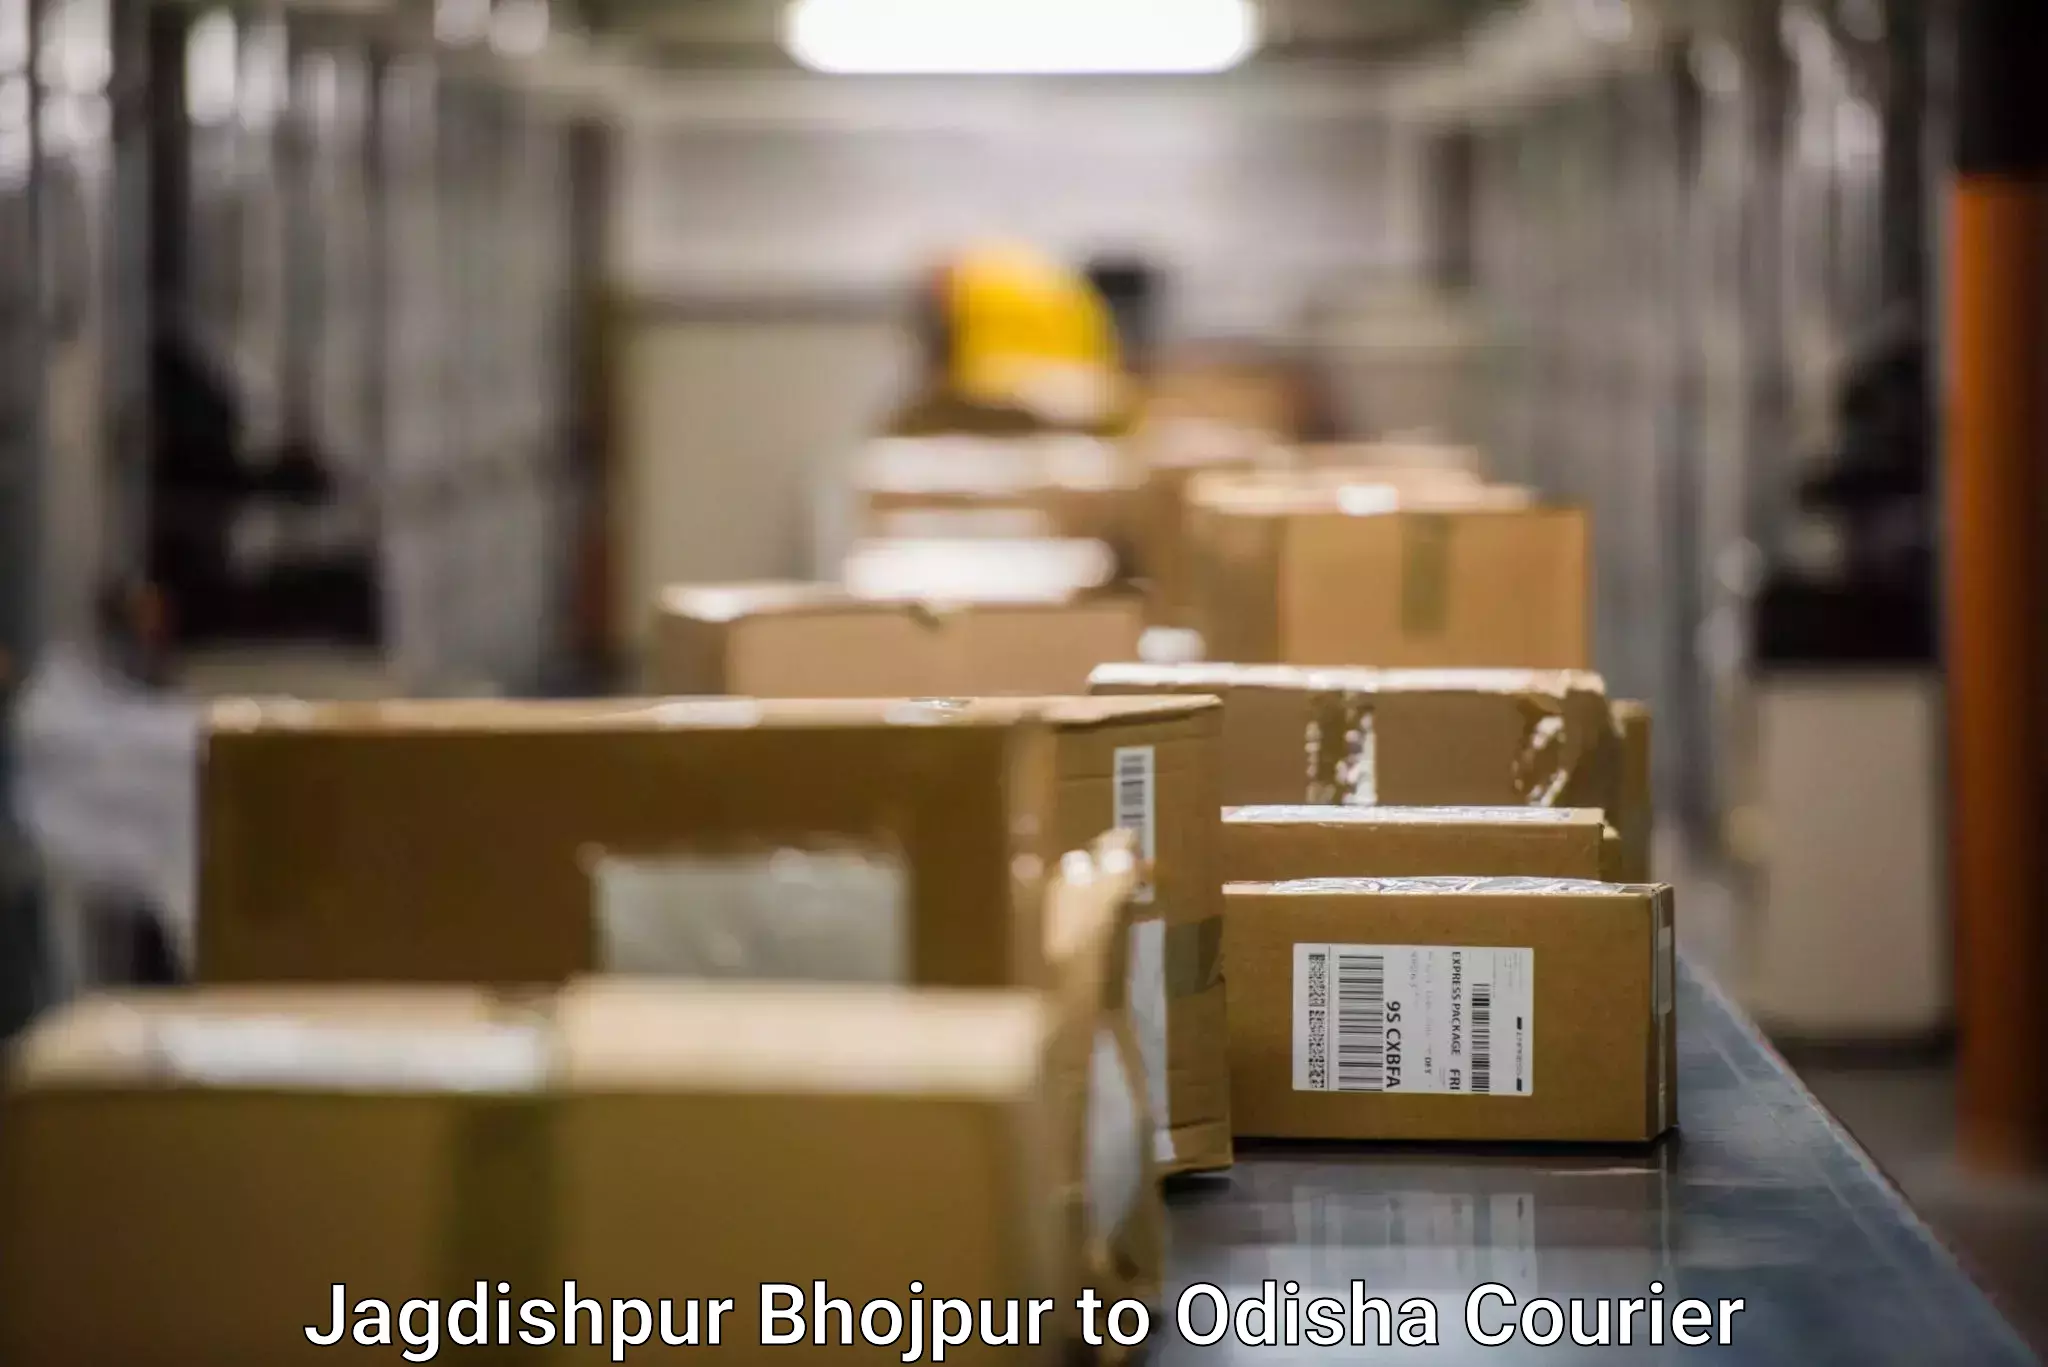 Personalized courier experiences Jagdishpur Bhojpur to Odisha